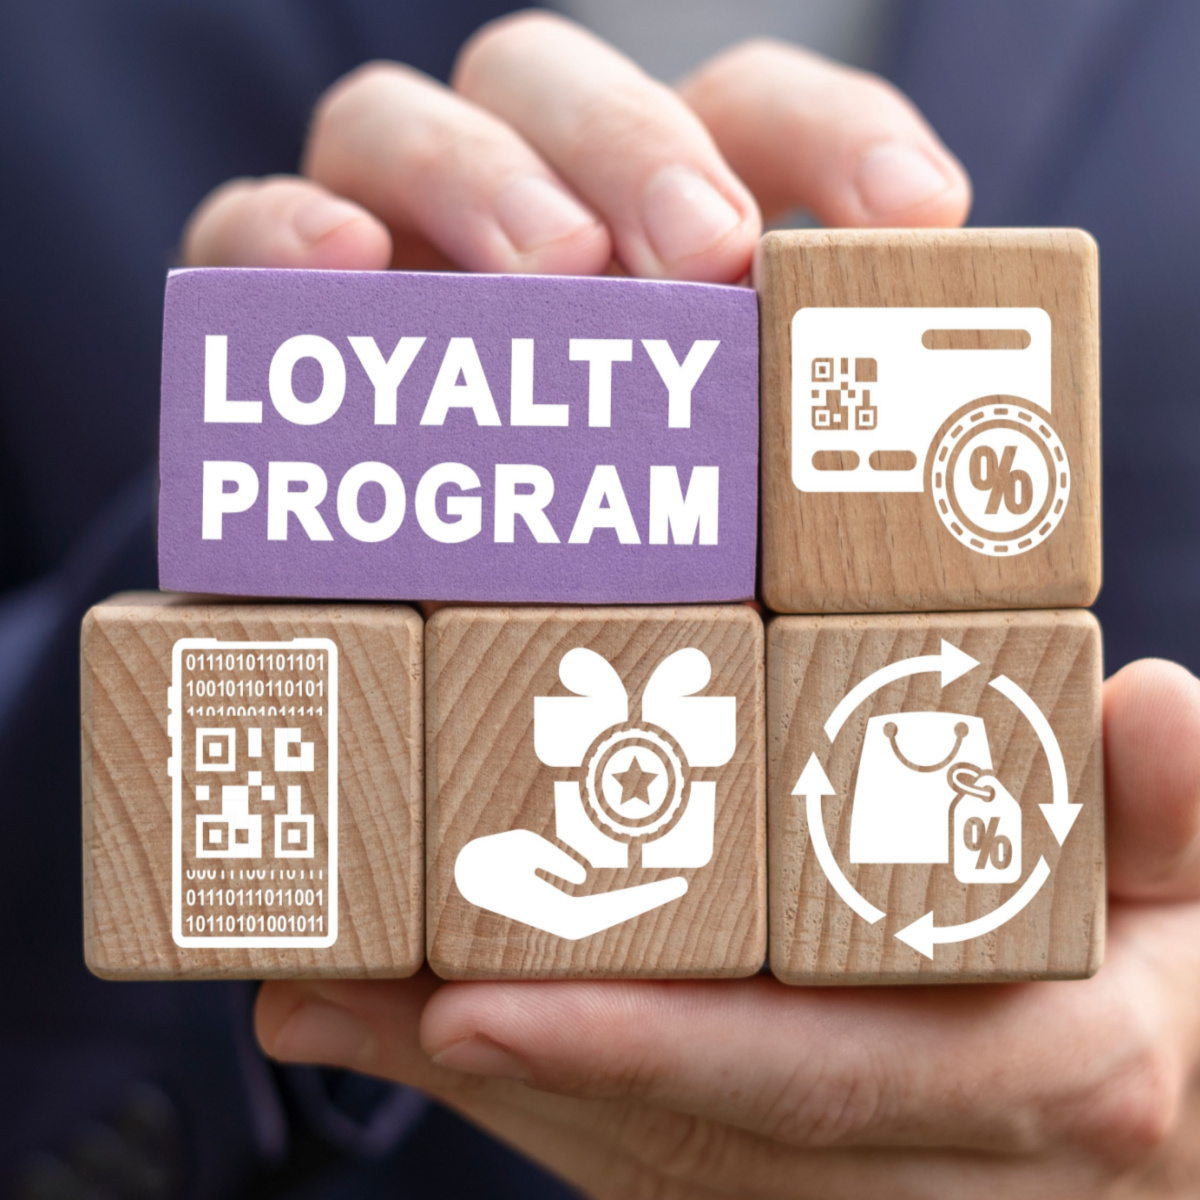 Interested in how #Rewards and targeted #Coupons affect customers in #LoyaltyPrograms?

In a new article @jretailing, @sebastiangabel2 (@RSMErasmus) and @d_h_guhl (@HumboldtUni) share some interesting findings. (1/3)

